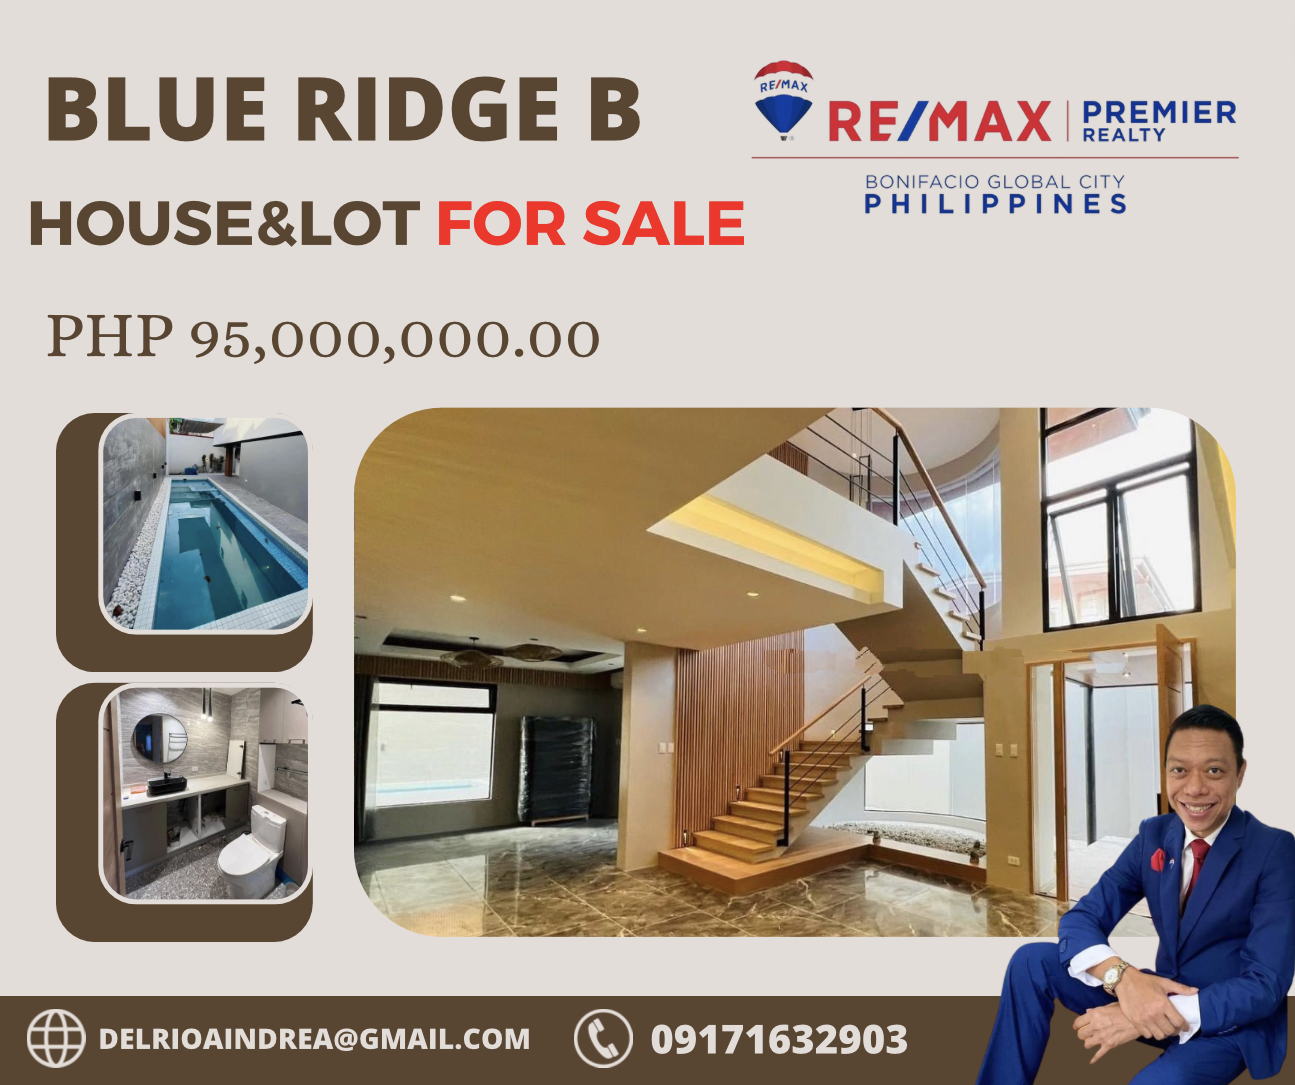 HOUSE AND LOT FOR SALE in Blue Ridge B, Quezon City‼️